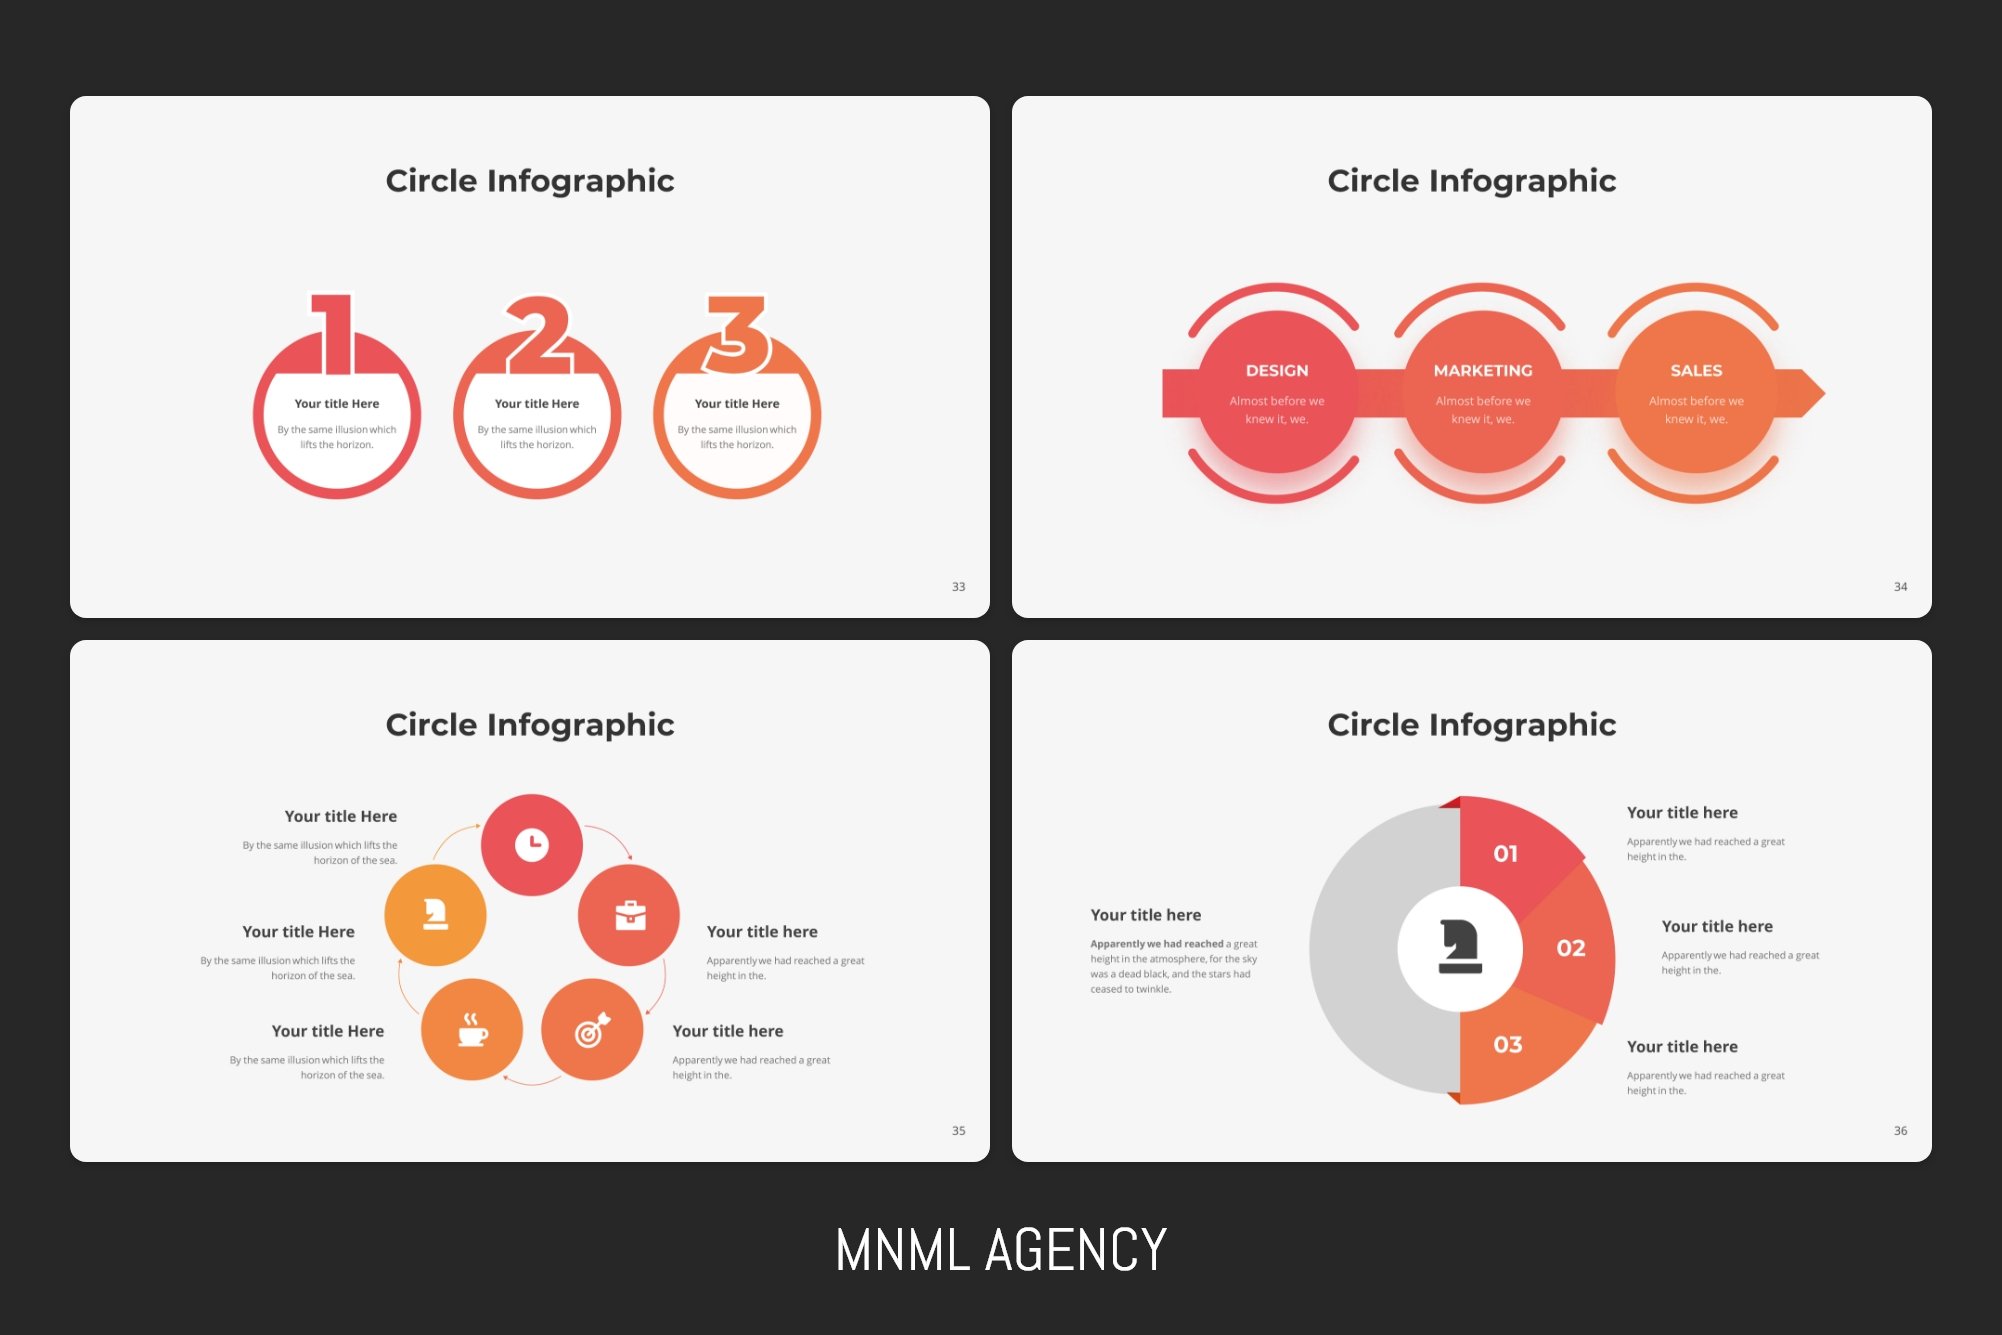 Colored circular infographics contain a lot of information and give it out in a simple way.